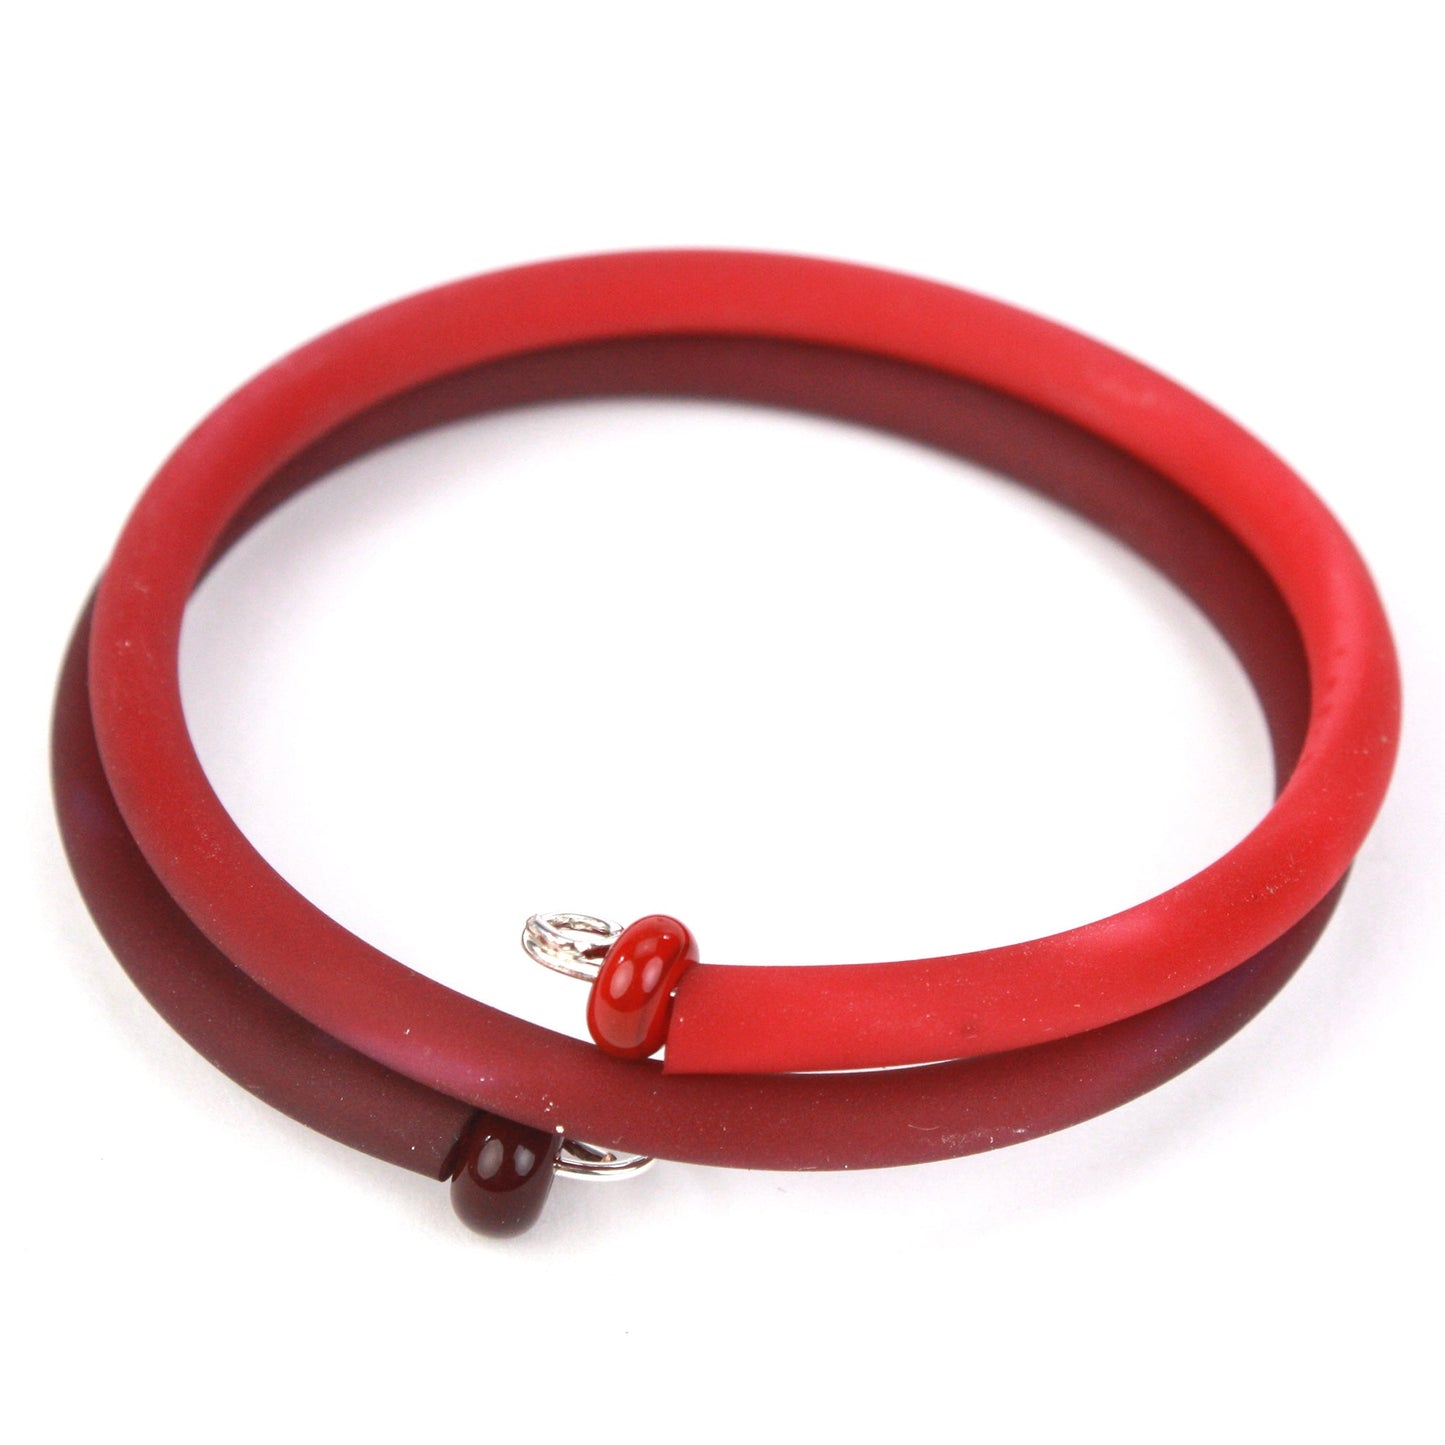 Double wrap bracelet - Dark red and light red